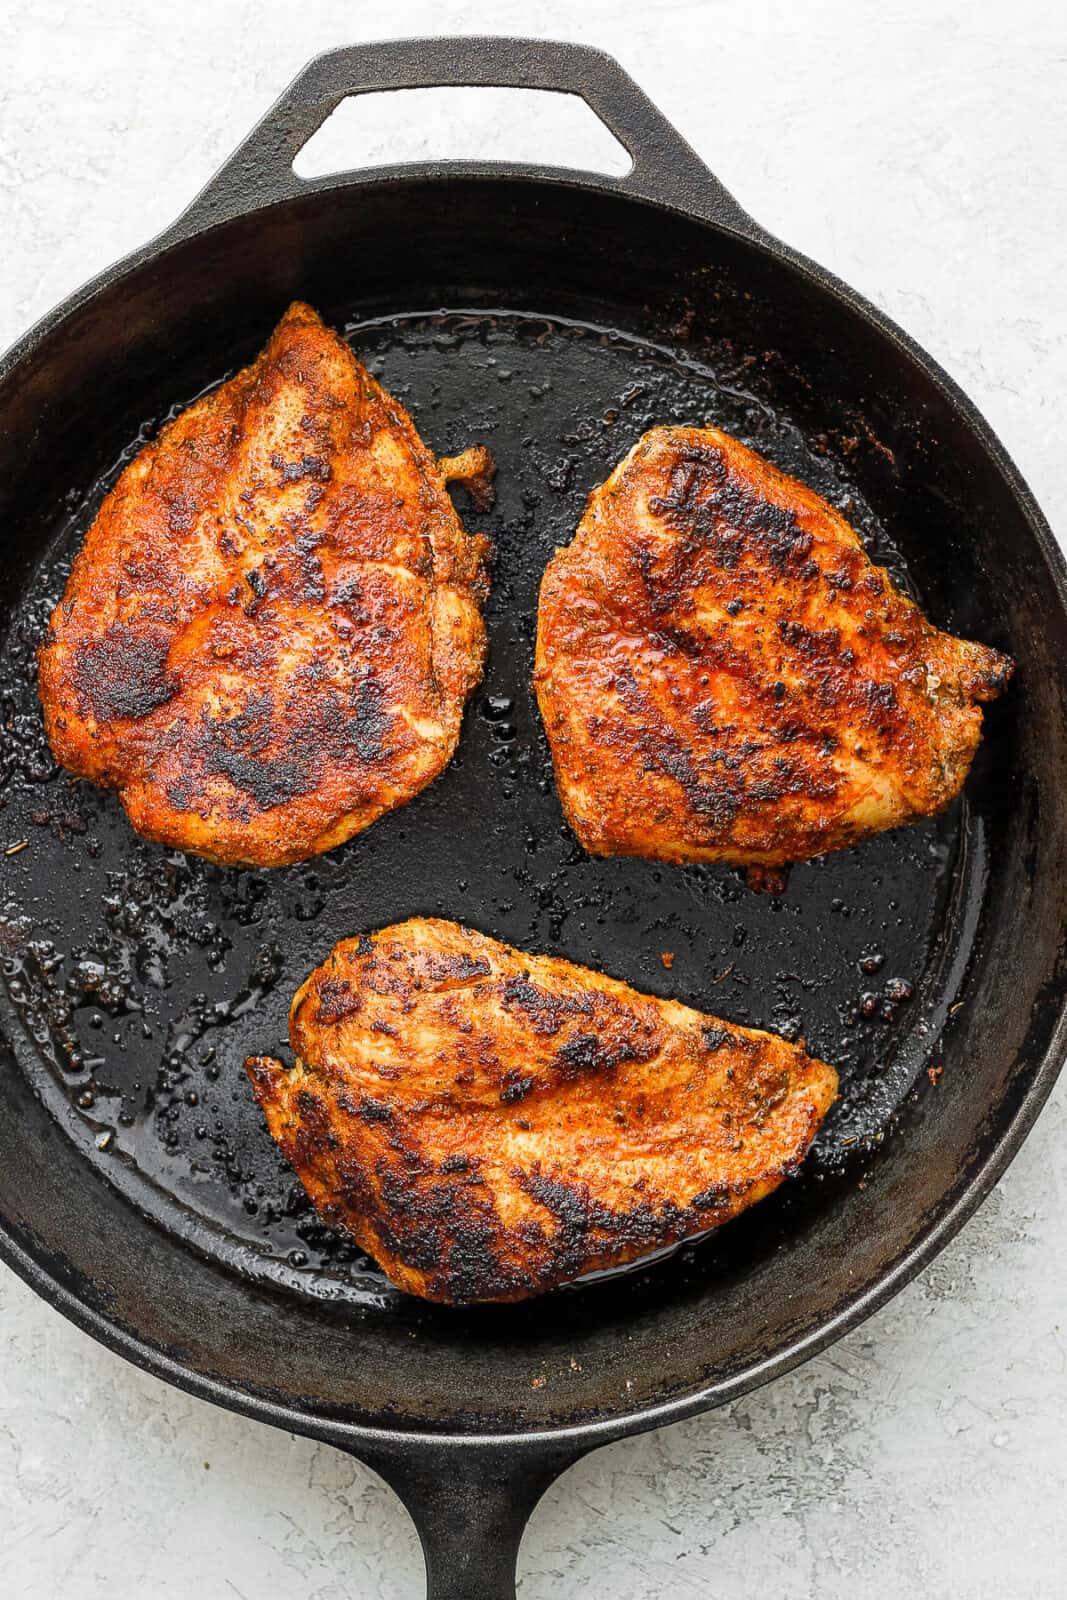 Blackened chicken breasts being seared in a cast iron skillet.